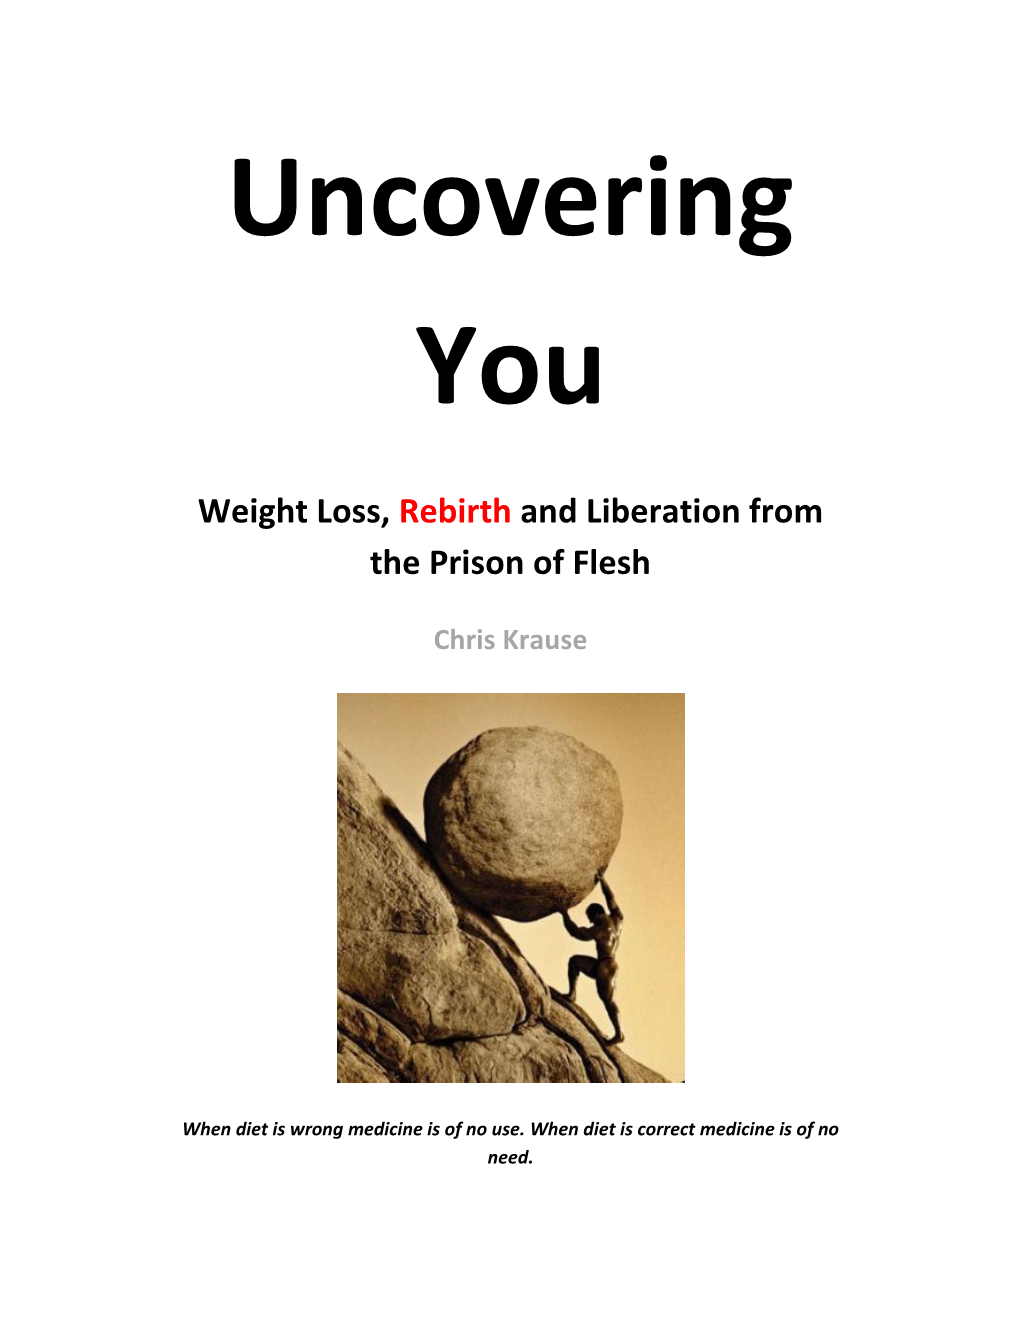 Weight Loss, Rebirth and Liberation from the Prison of Flesh